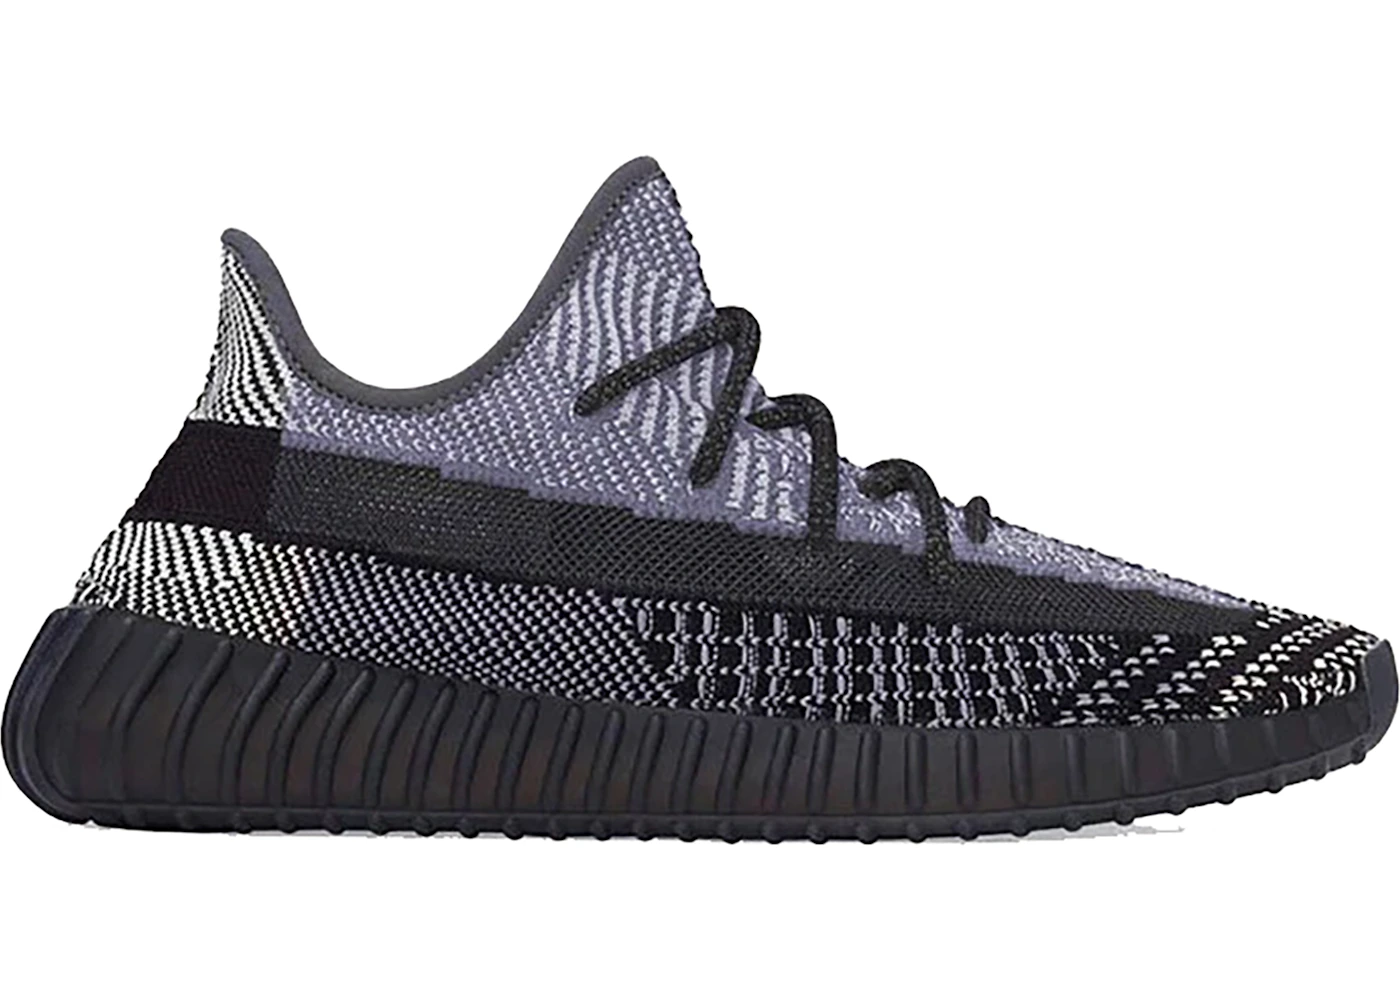 Wrap helicopter crab adidas Yeezy Boost 350 V2 Oreo - - US